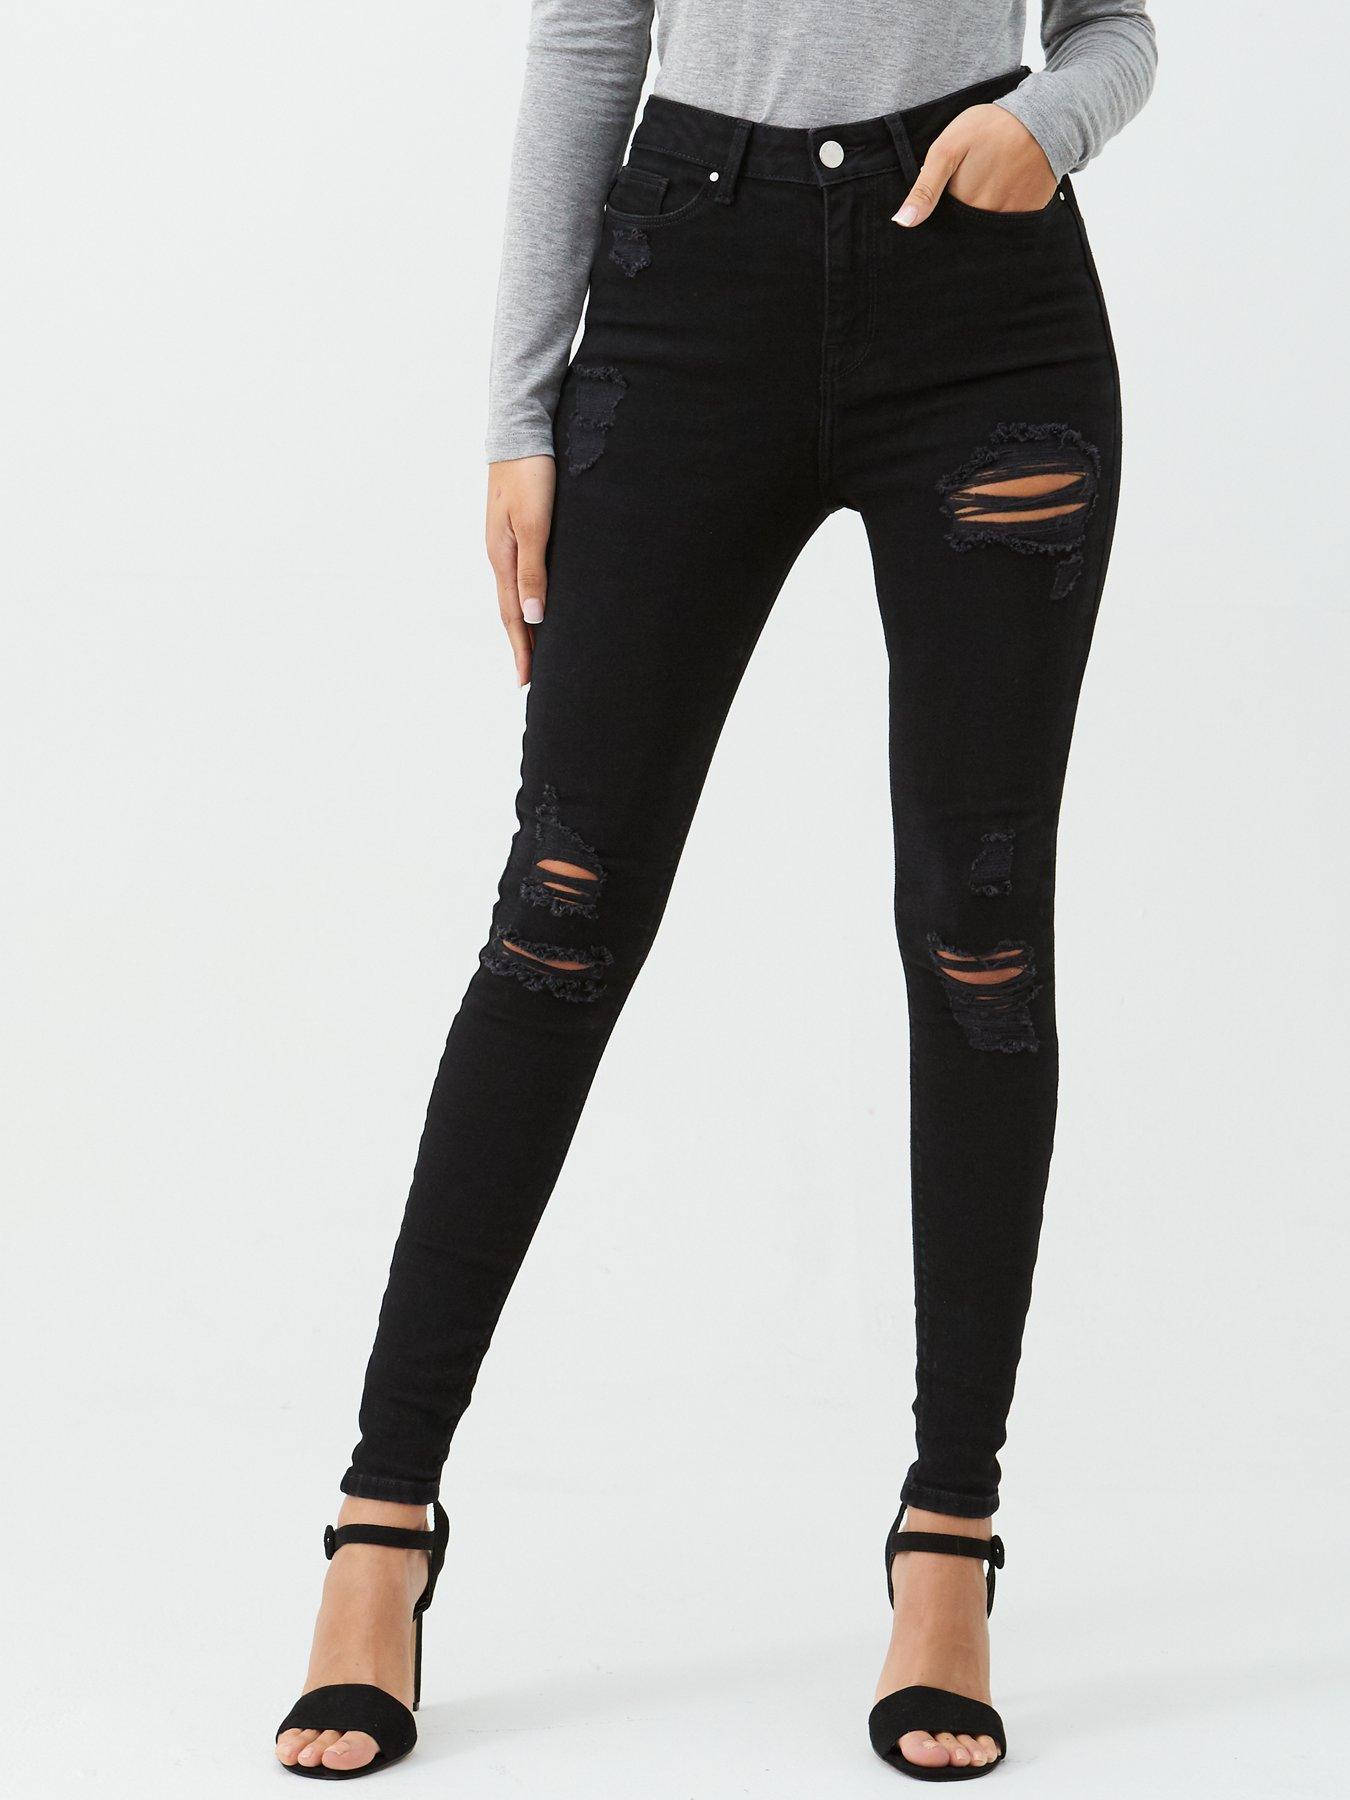 womens black ripped jeans uk